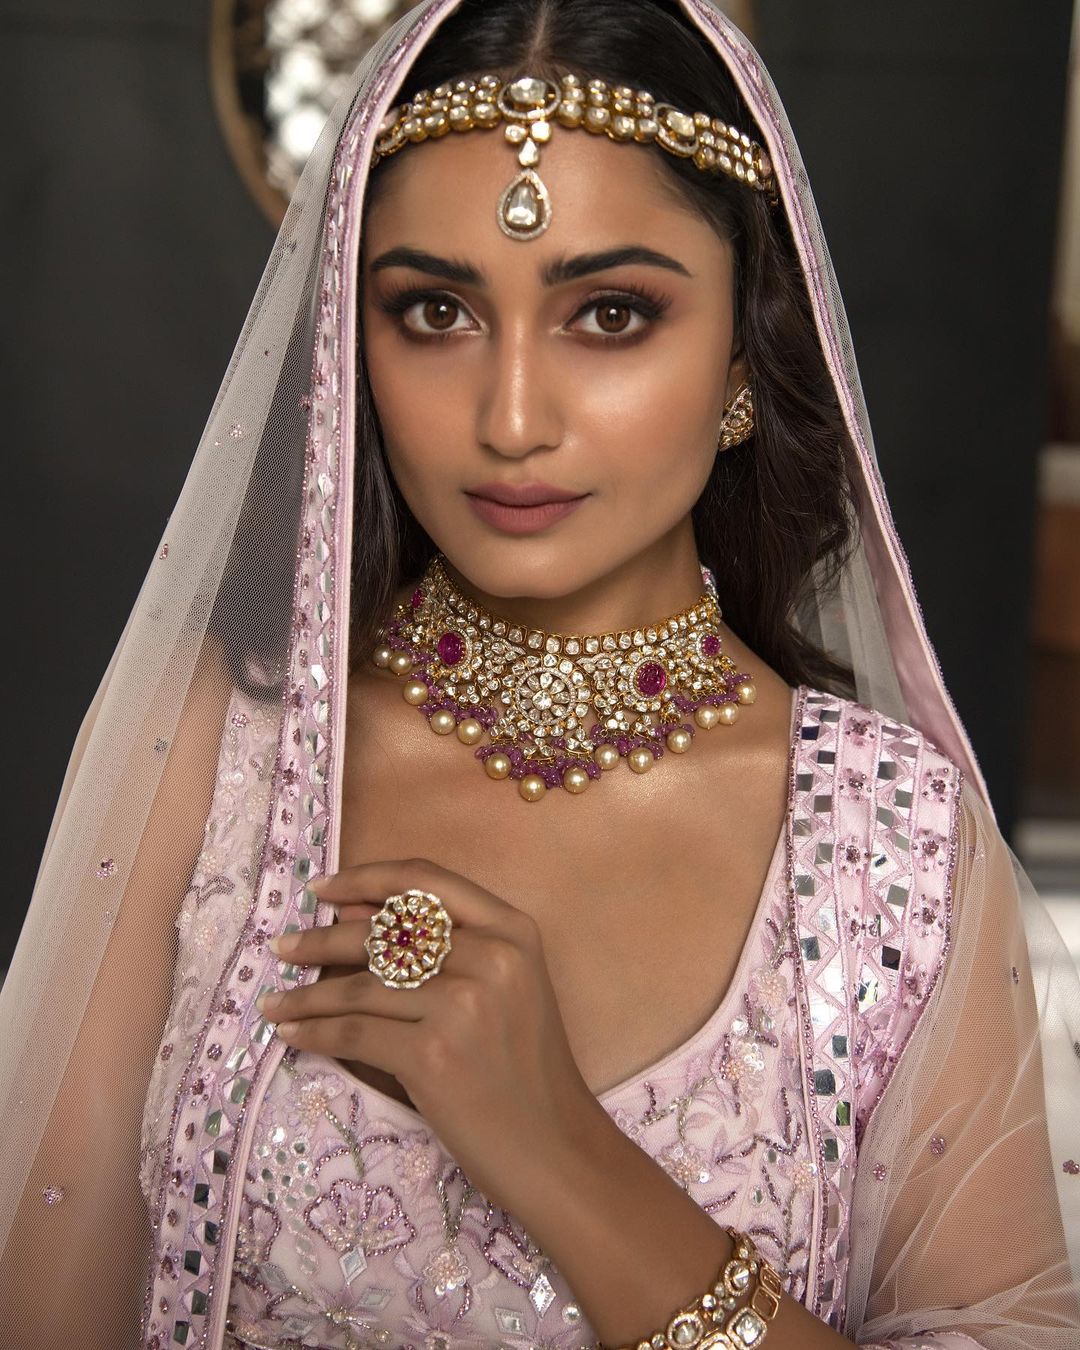 Tridha Choudhury Seducing Every Guest With That Look On Her Wedding Night To Be Used By Everyone 